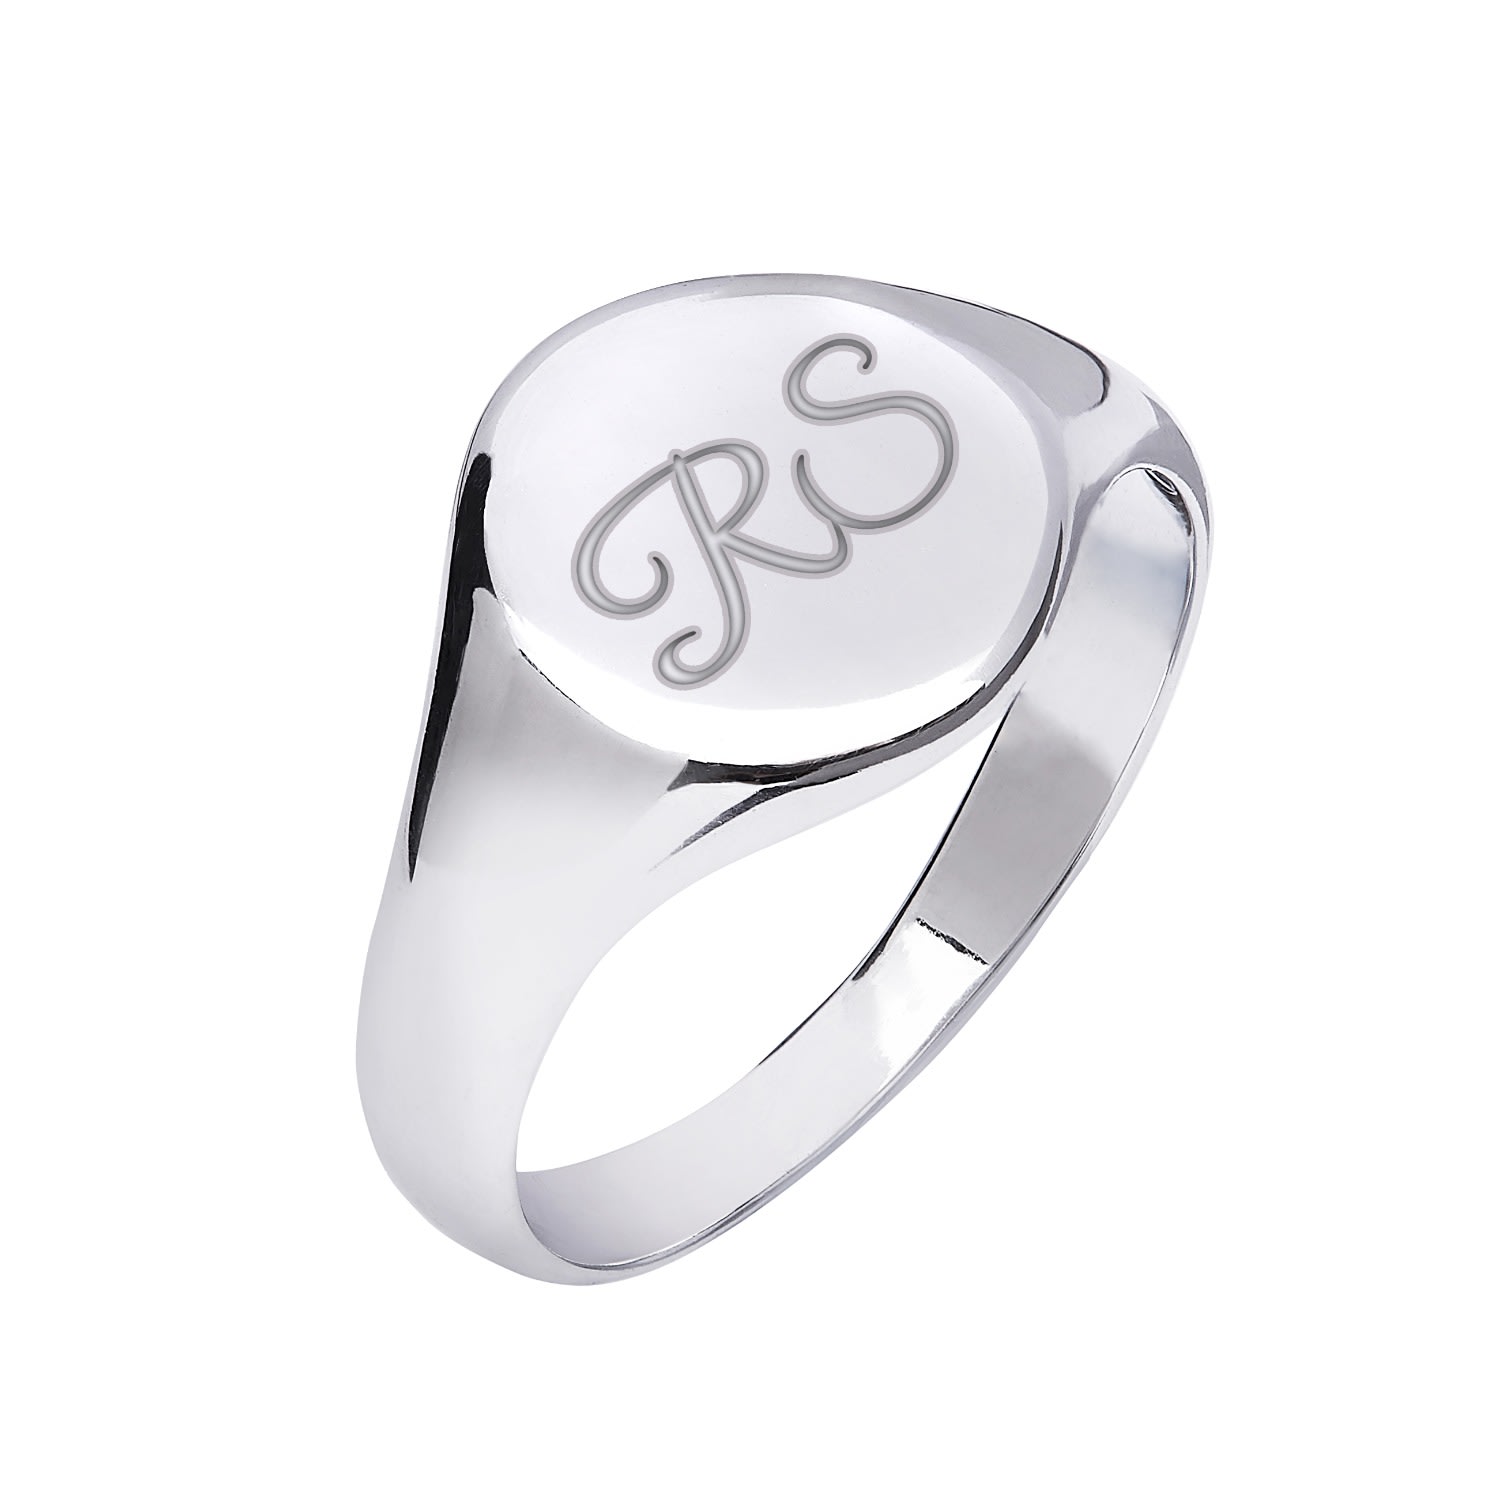 Silver Initial Signet Ring For Men Or Women - Size P Kaizarin